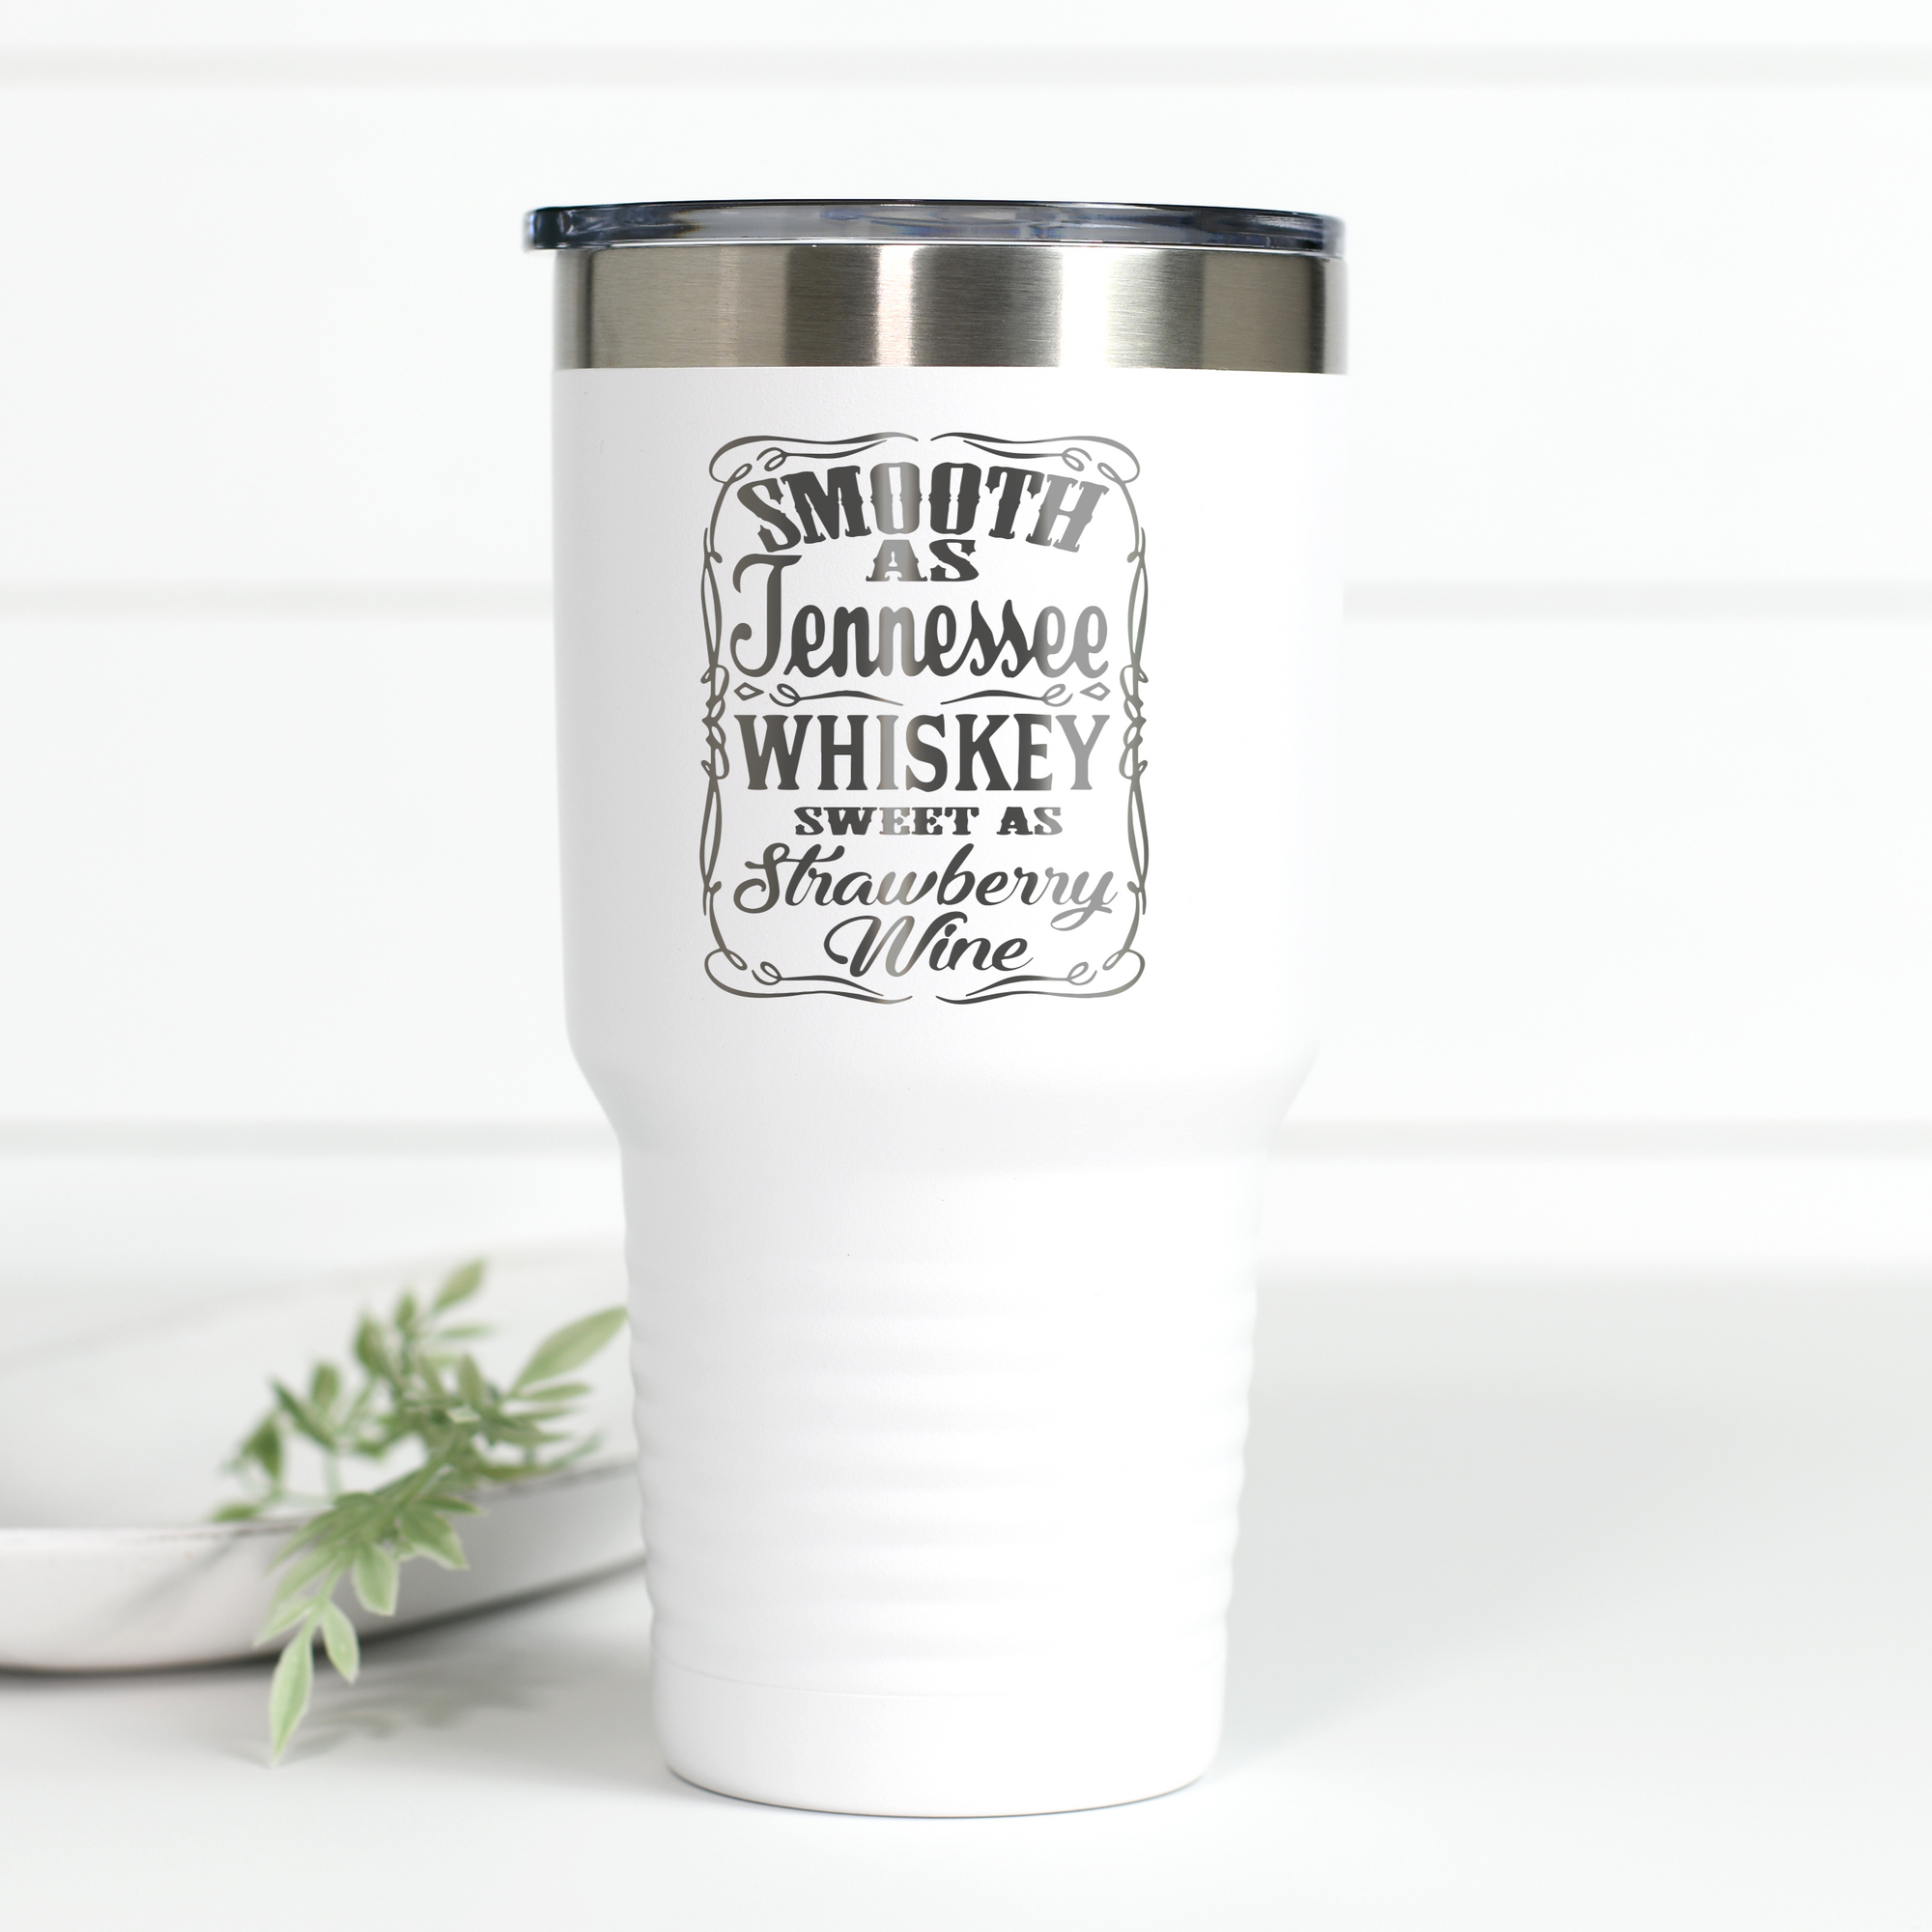 Smooth As Tennessee Whiskey 30 oz Engraved Tumbler